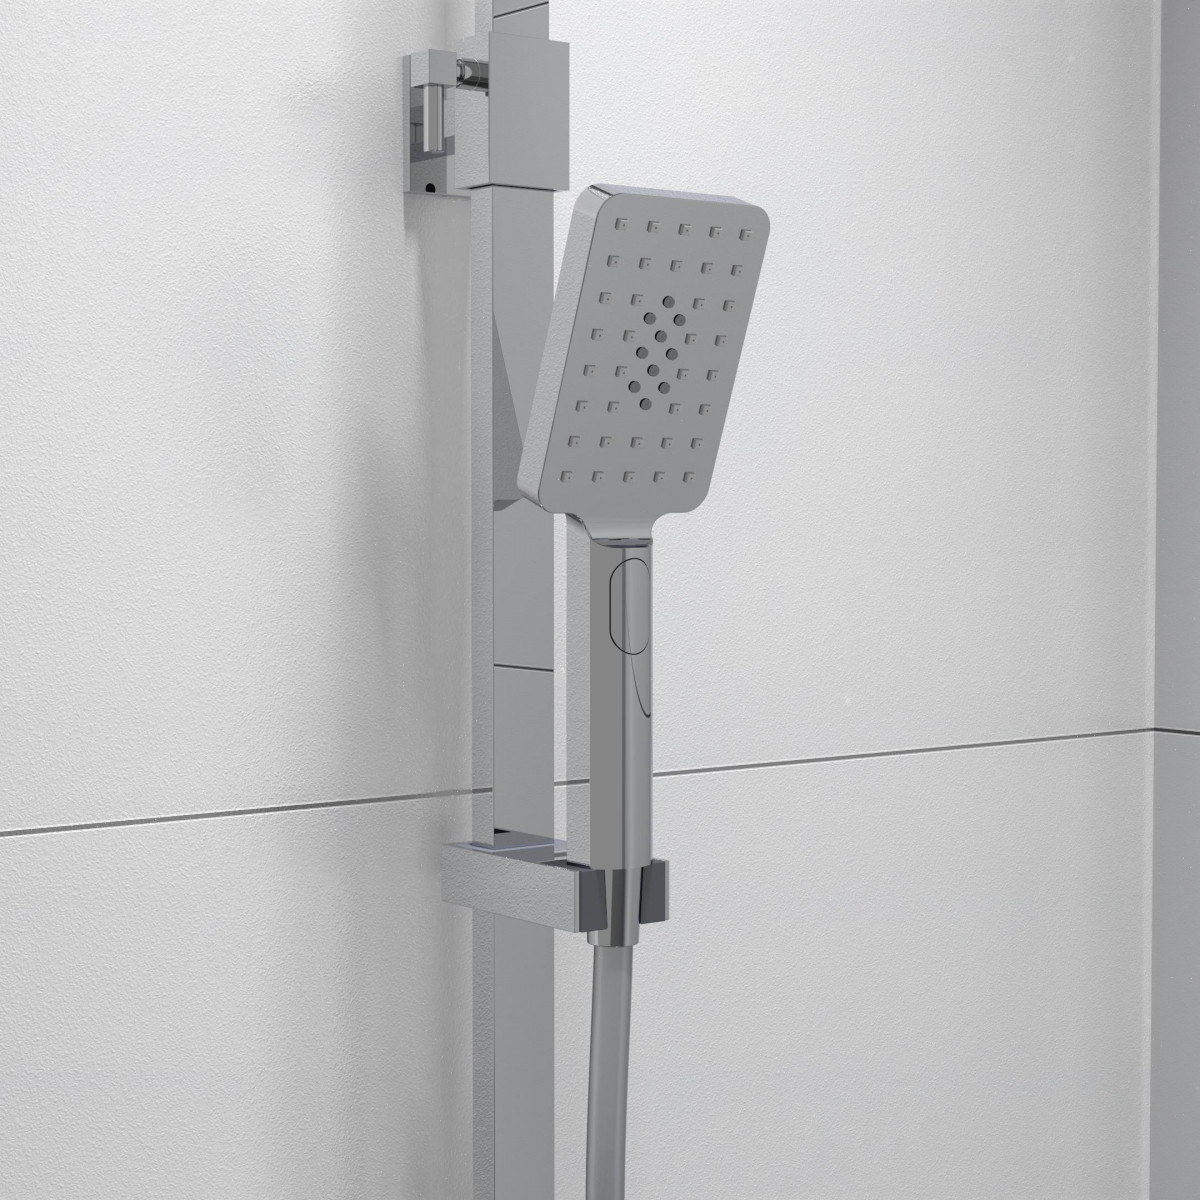 OCEAN Overhead shower set, chrome/ white, with thermostatic tray